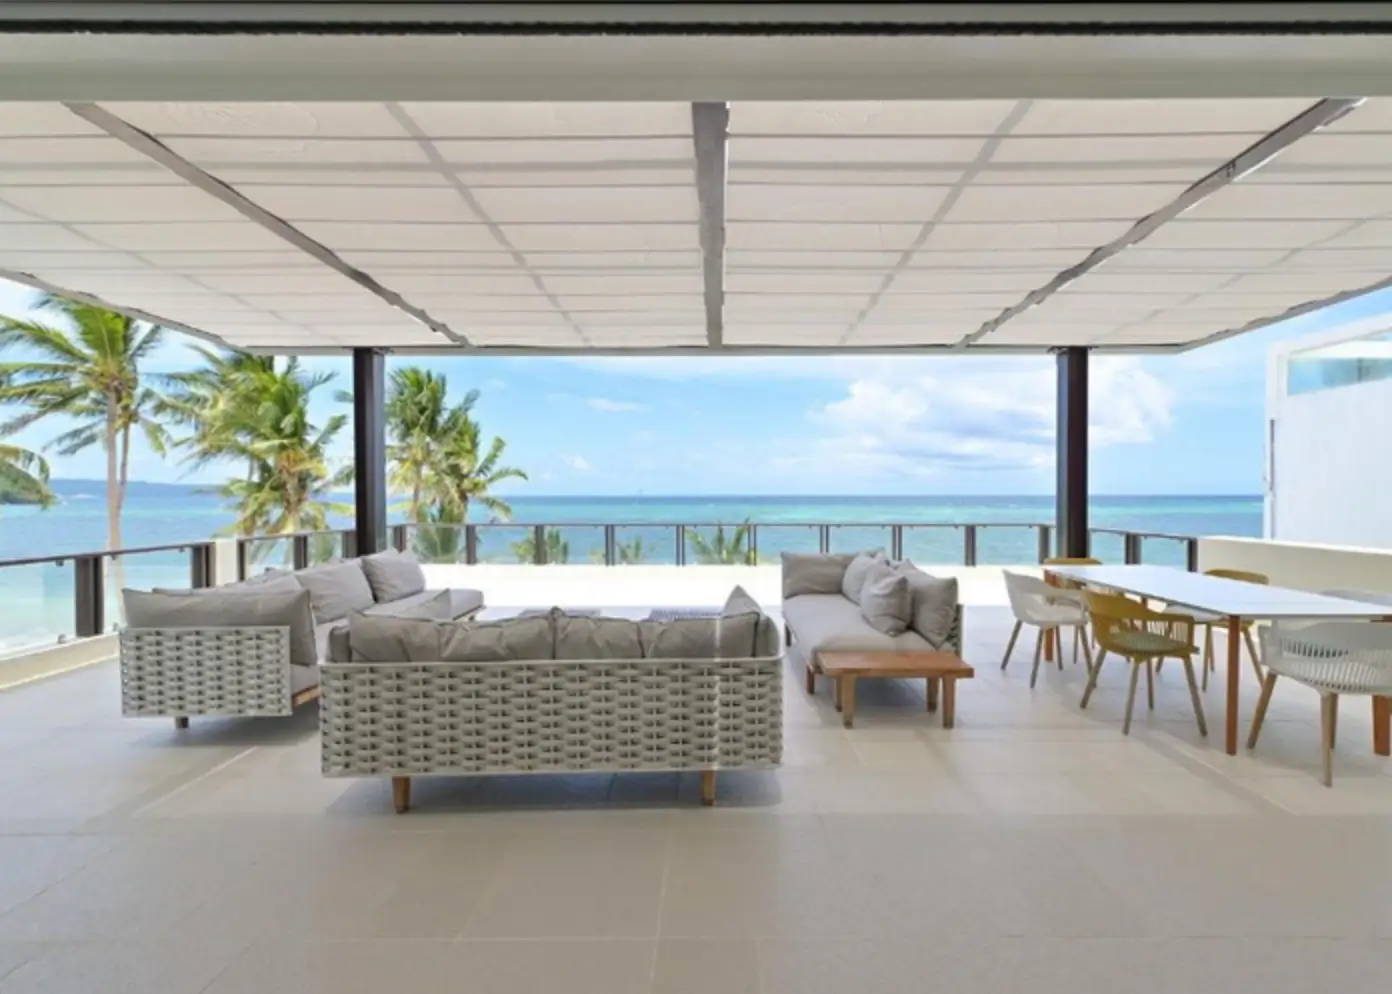 Open-air lounge area of the penthouse at 7Stones, a boutique hotel in Boracay. The space is stylishly furnished with modern sofas and a dining area, offering a panoramic view of the sea and palm trees.